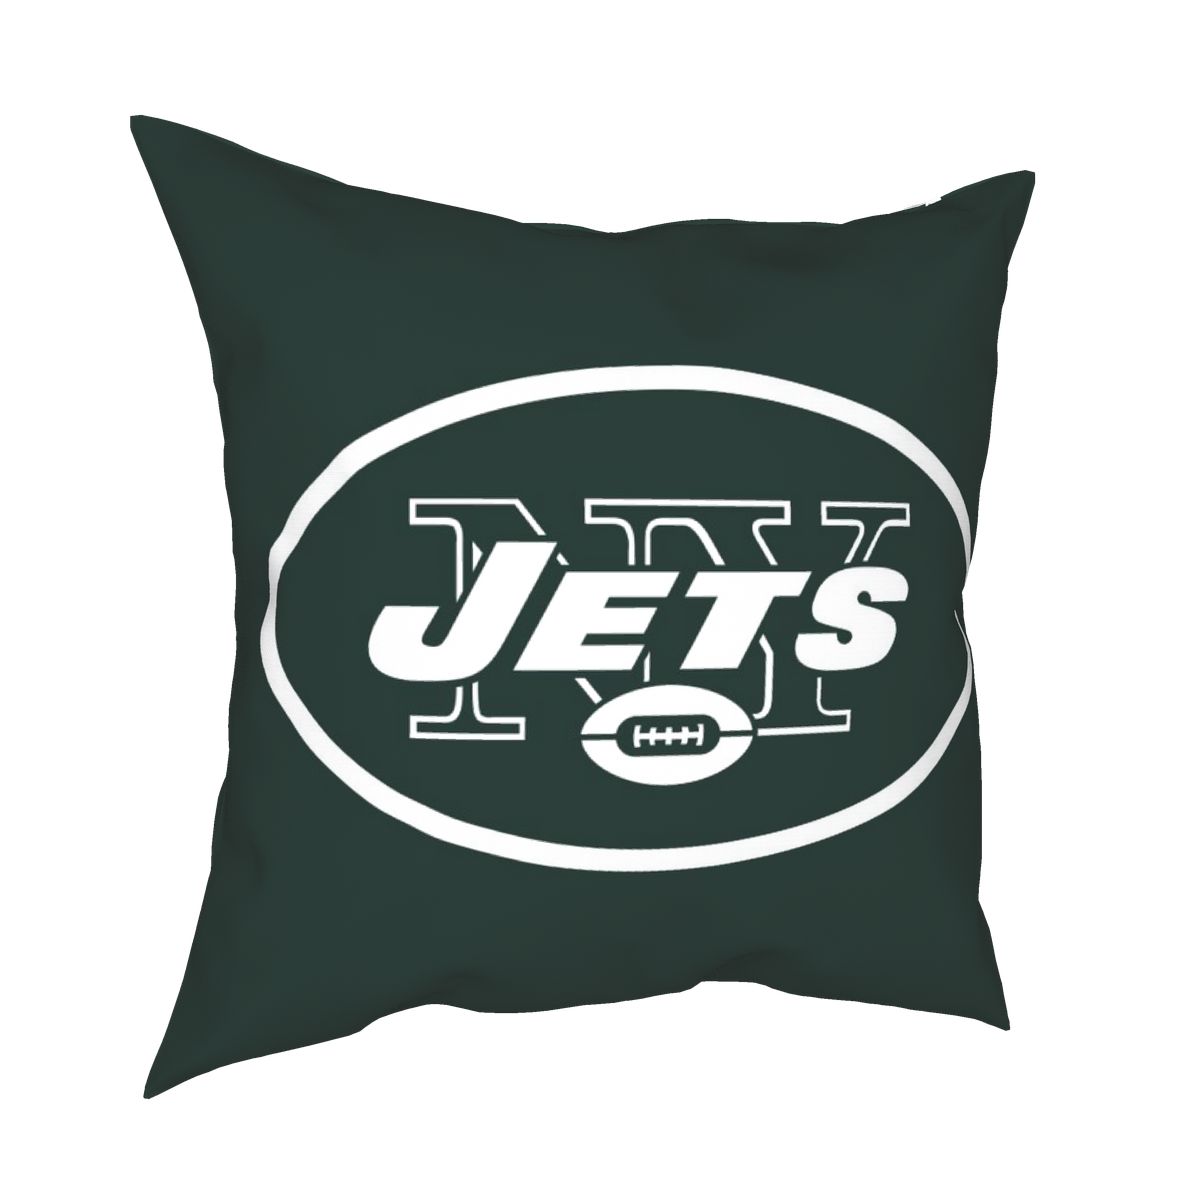 Custom Decorative Football Pillow Case New York Jets Green Pillowcase Personalized Throw Pillow Covers